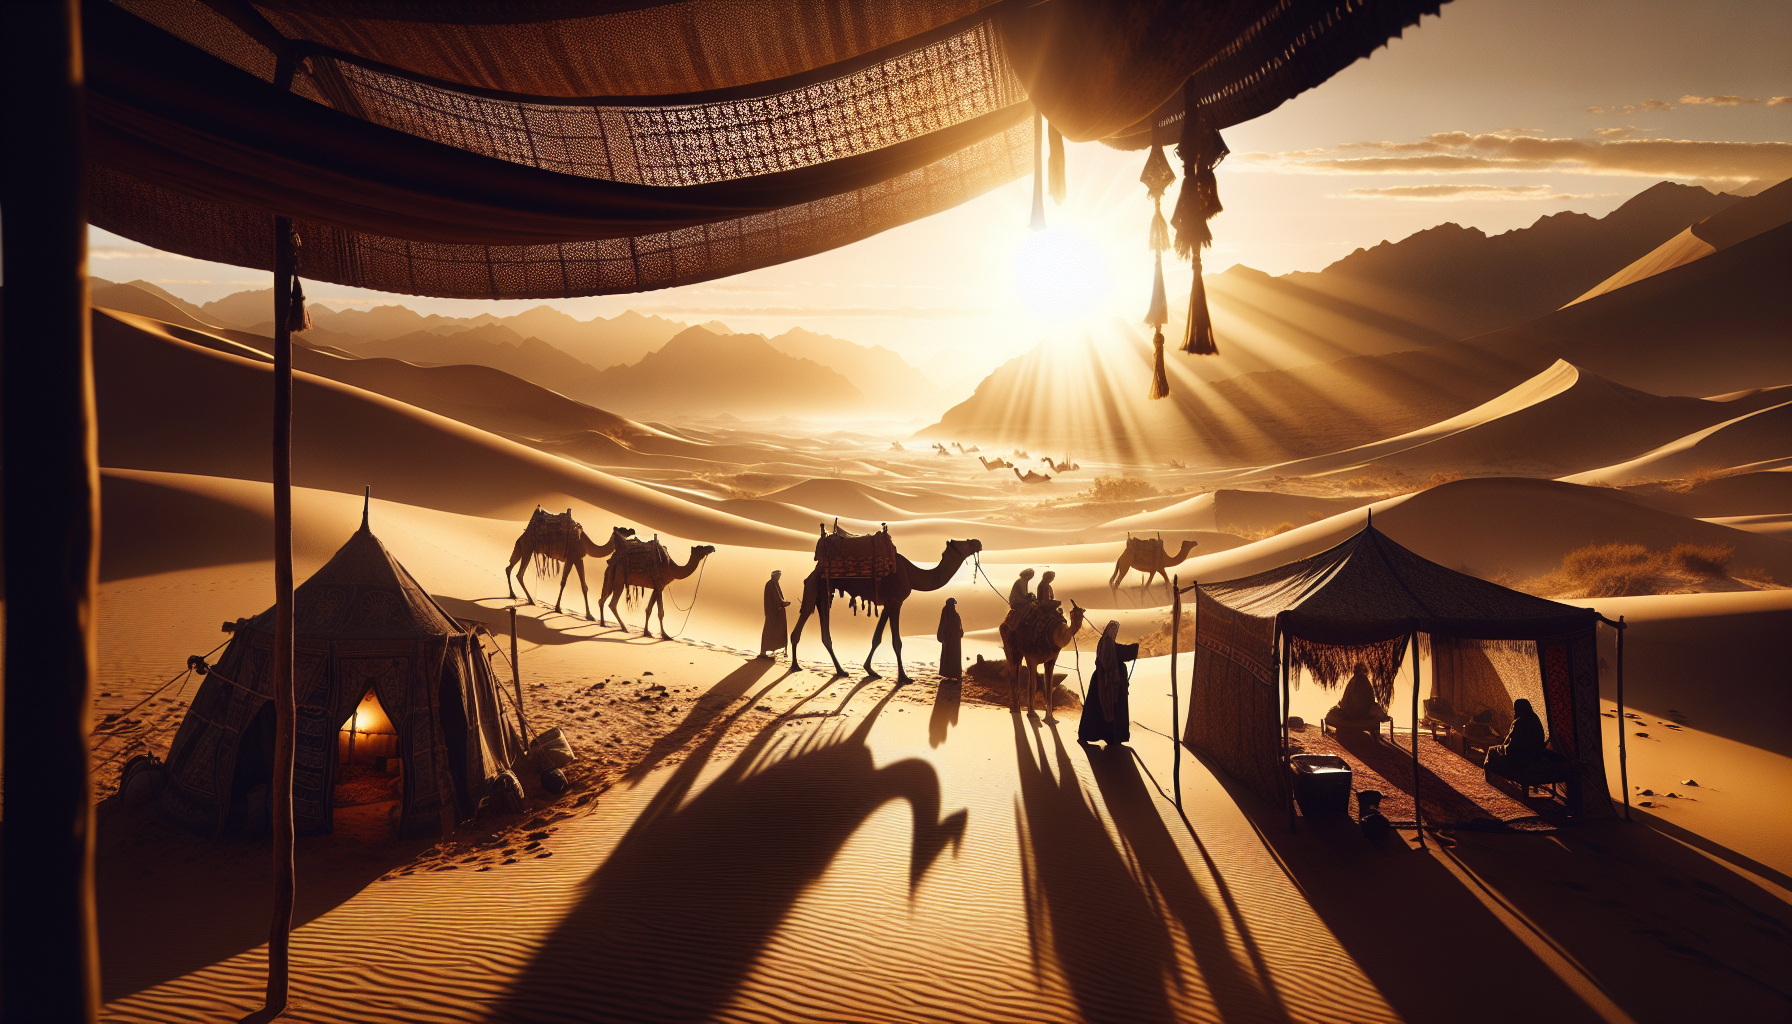 embark on an unforgettable journey and discover the bedouin desert experience now. get ready for an adventure like no other!